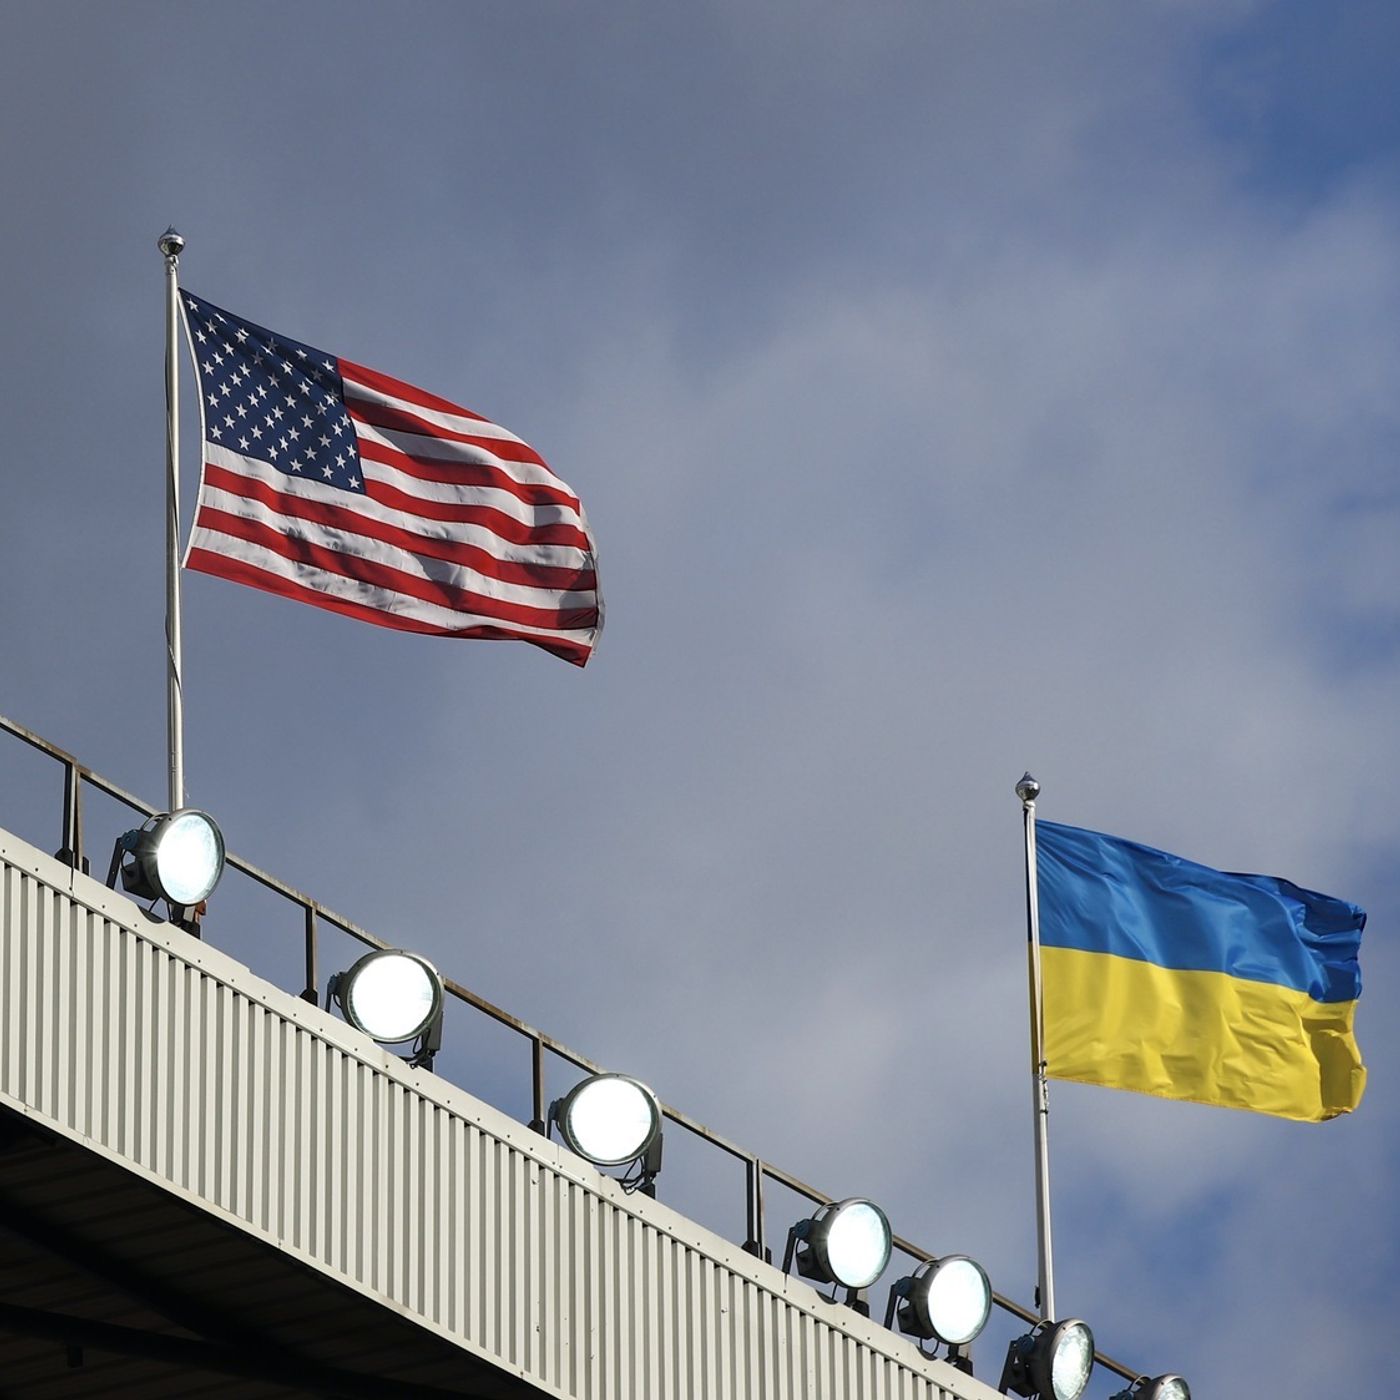 The kleptocratic connections between the US and Ukraine